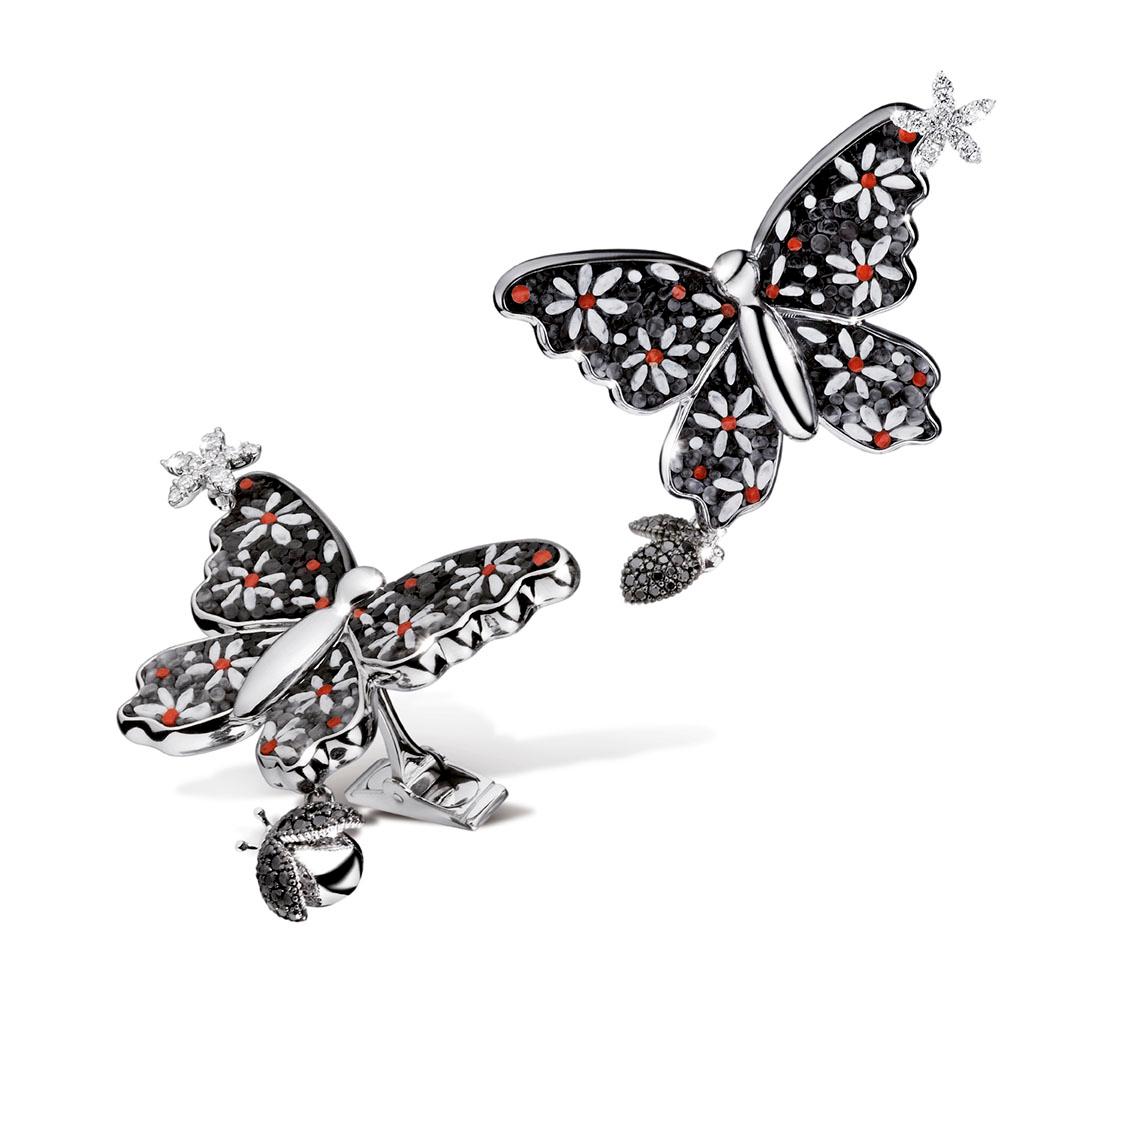 Romantic Cuffliks White Gold White Diamonds Black Diamonds Handdecorated with MicroMosaic For Sale